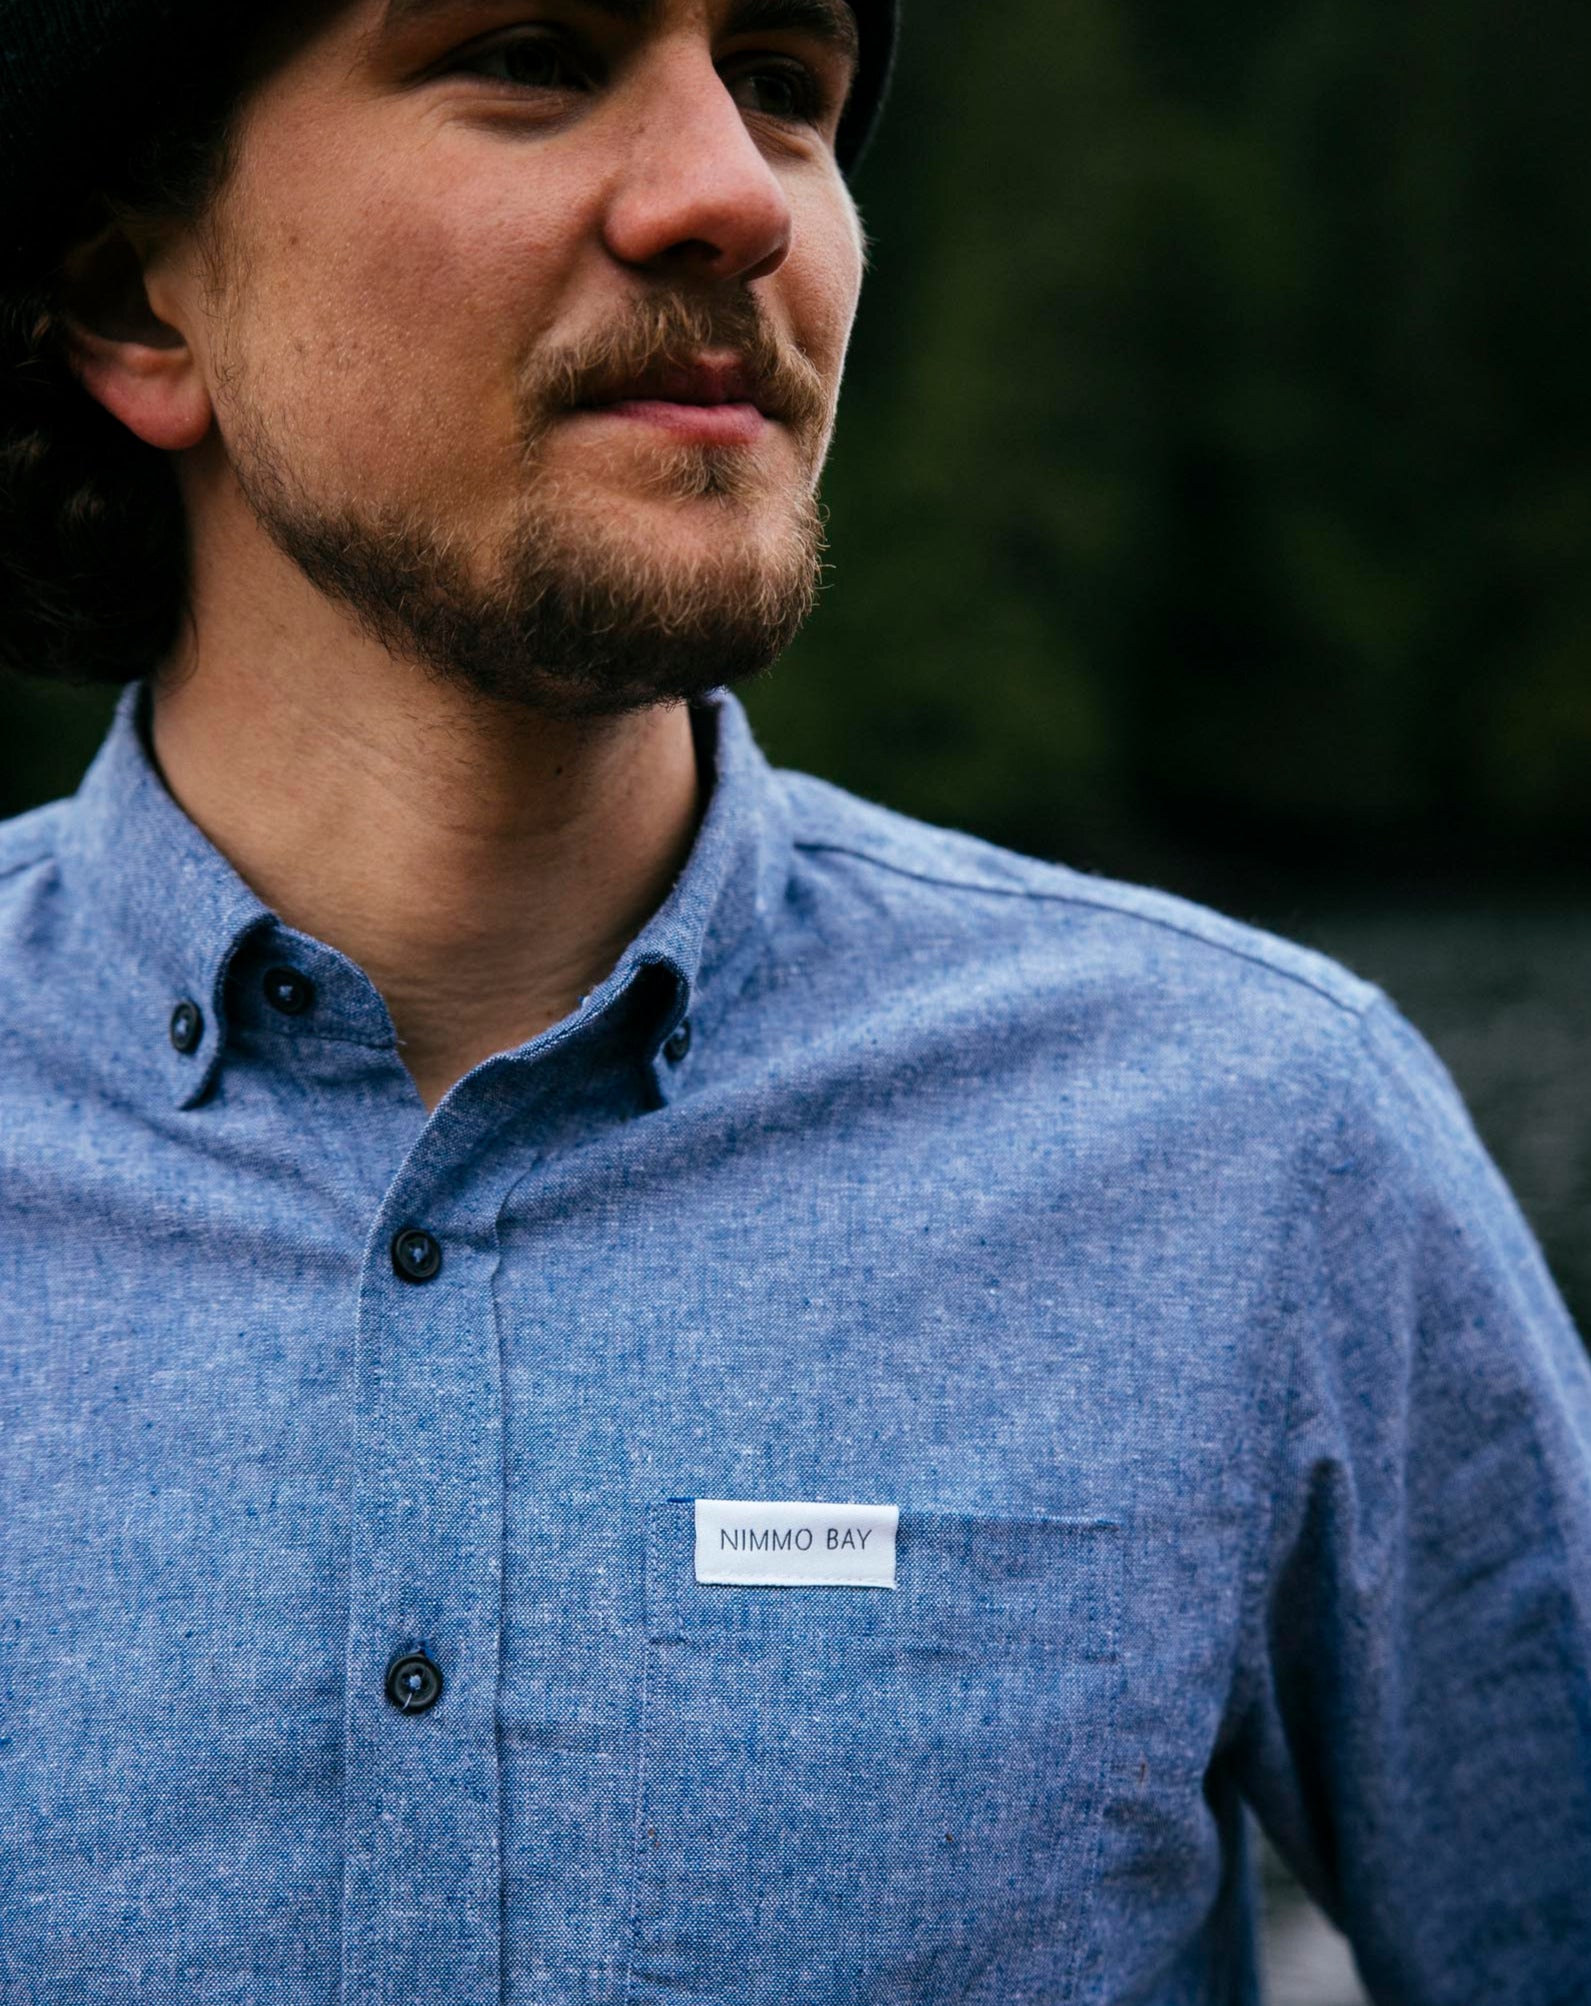 Nimmo Bay x Anian long sleeve blue chambray shirt. Man looking off into the distance